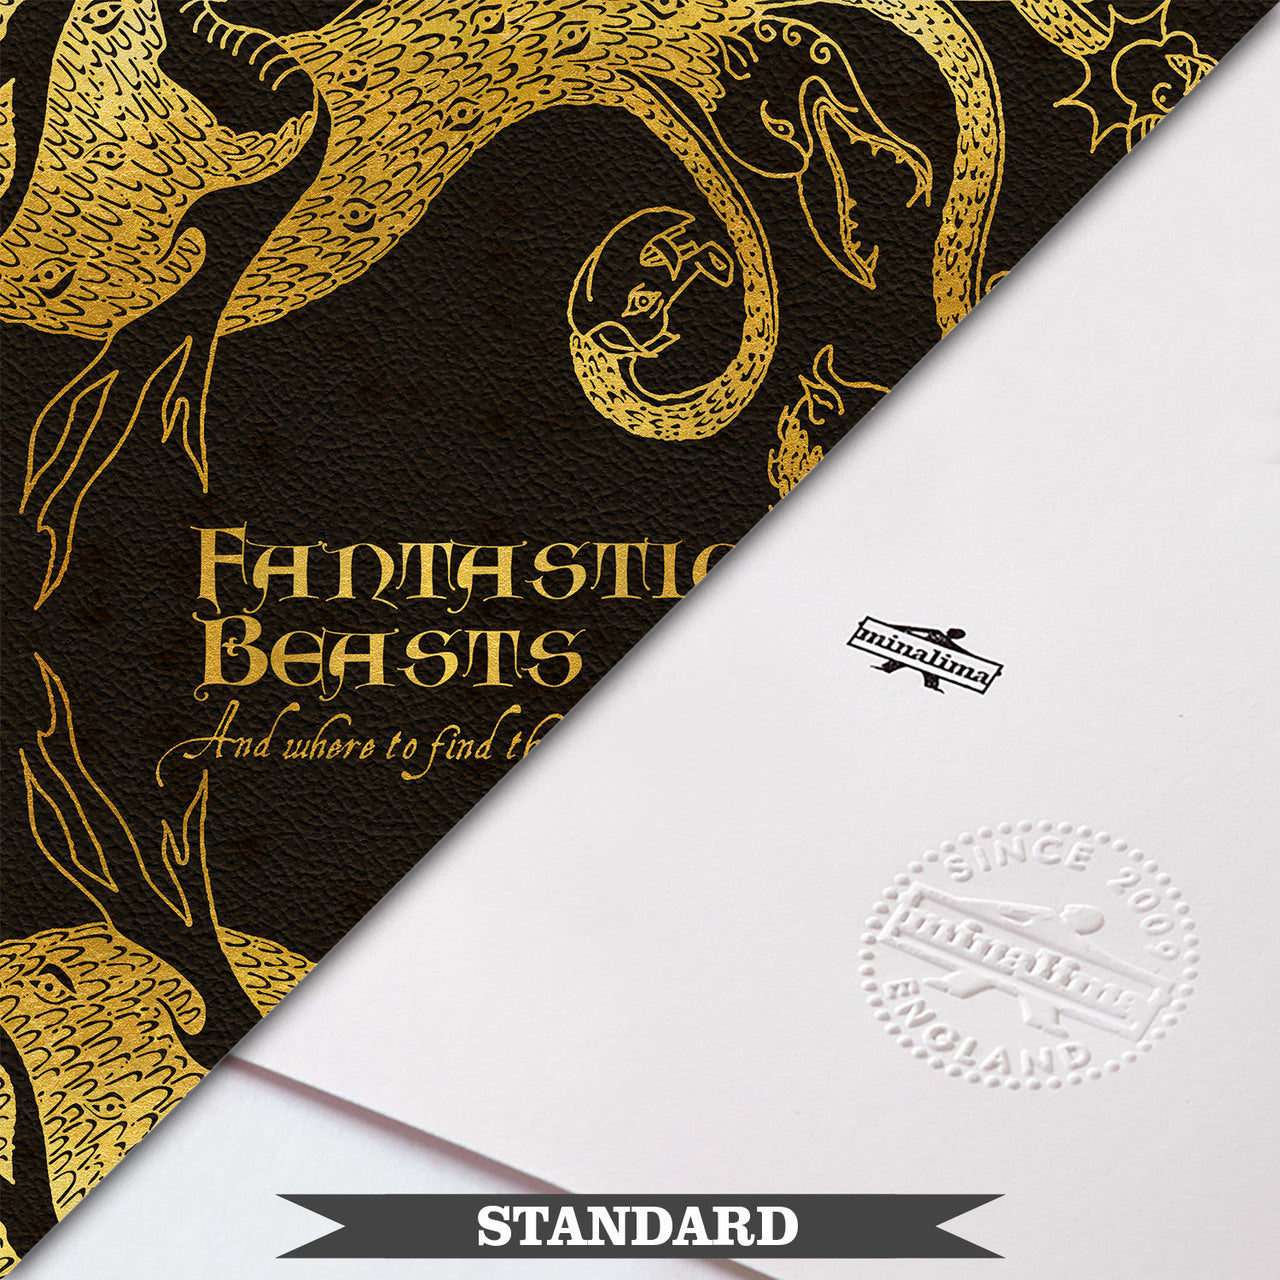 Fantastic Beasts and Where to Find Them Limited Edition Art Print